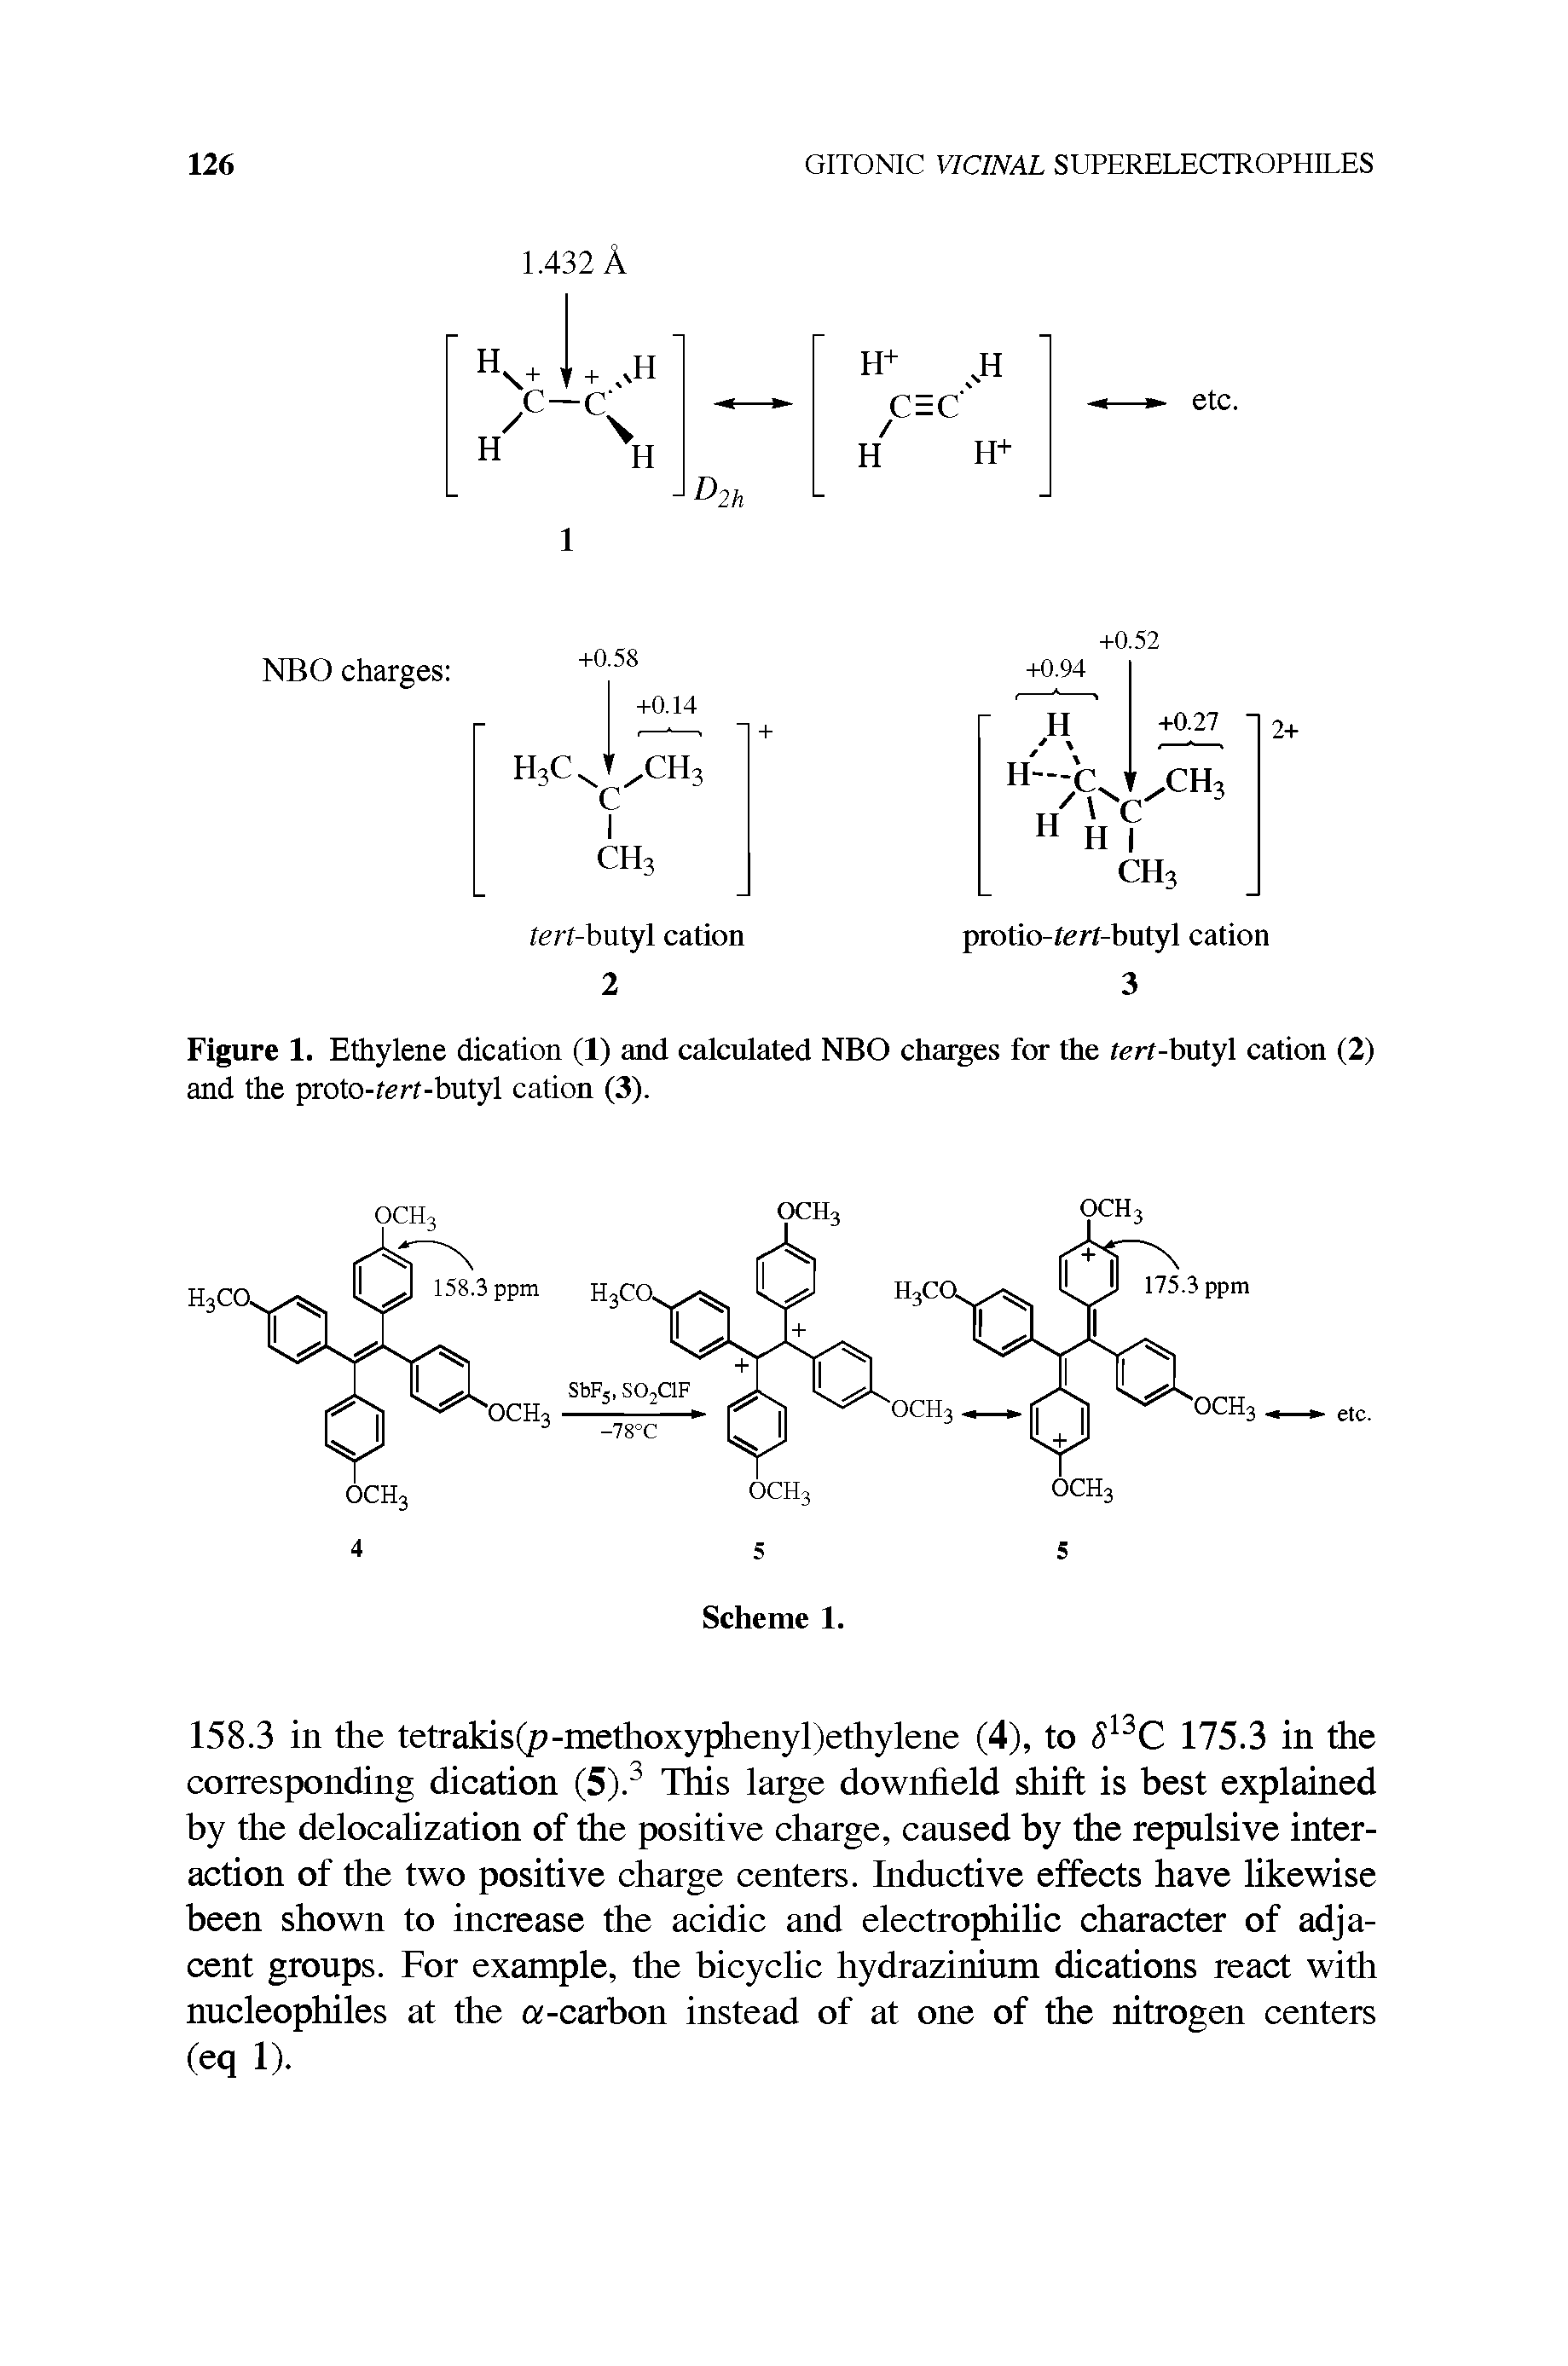 Figure 1. Ethylene dication (1) and calculated NBO charges for the tort-butyl cation (2) and the proto-tort-butyl cation (3).